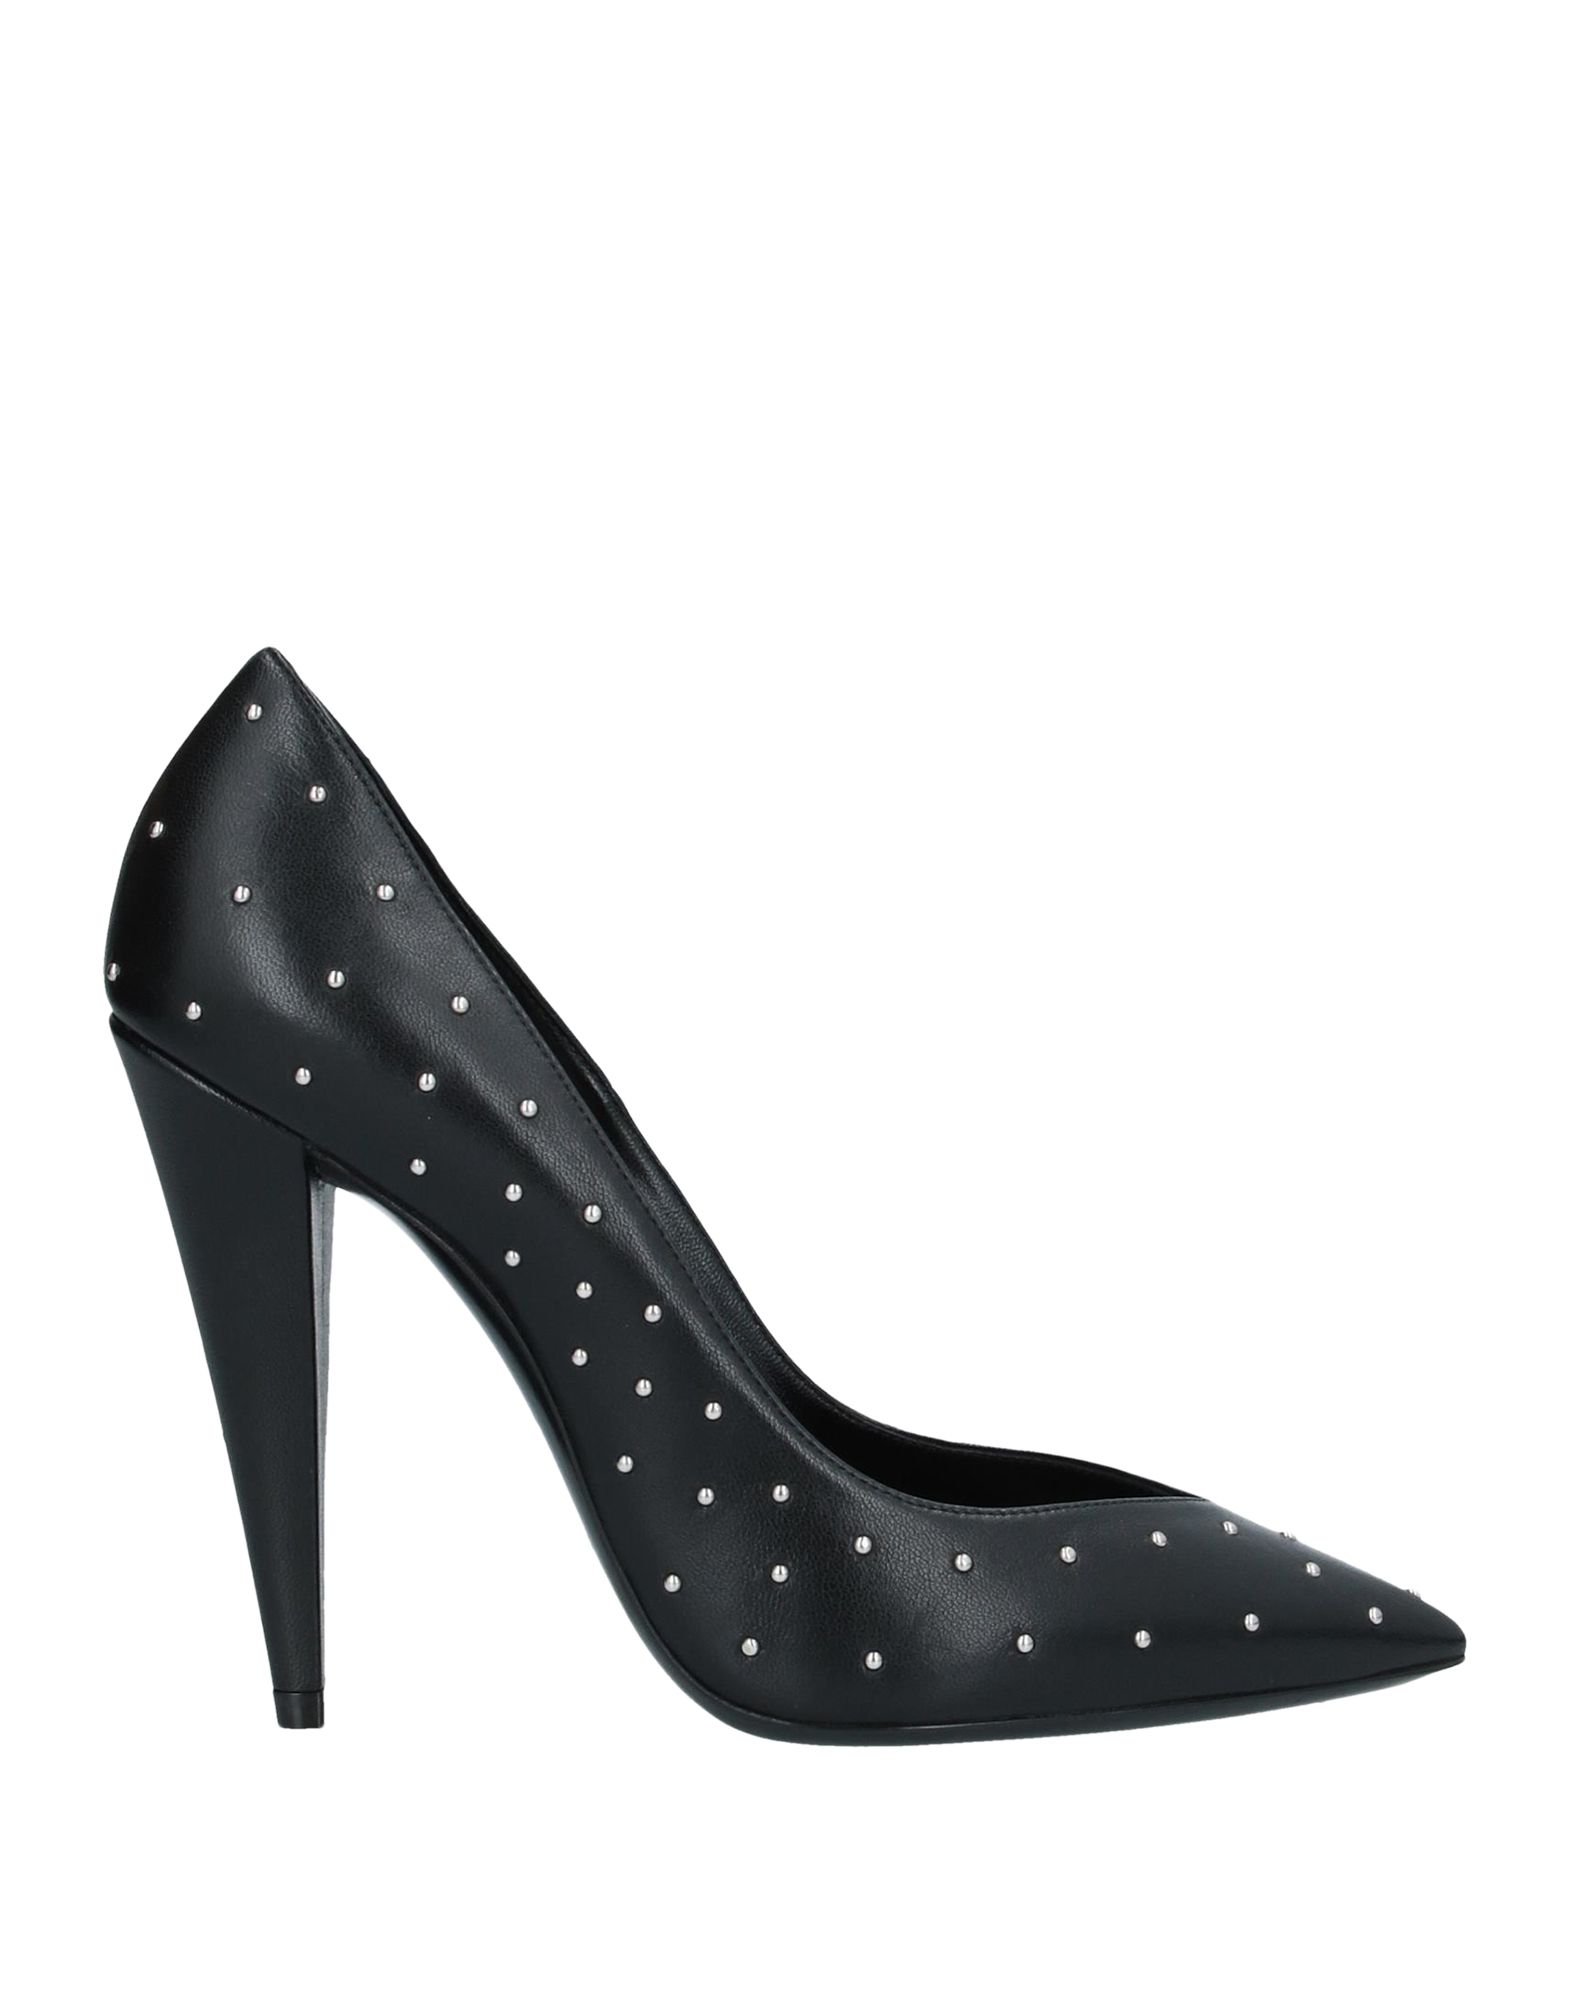 leather, studs, solid color, narrow toeline, cone heel, covered heel, leather lining, leather sole, 